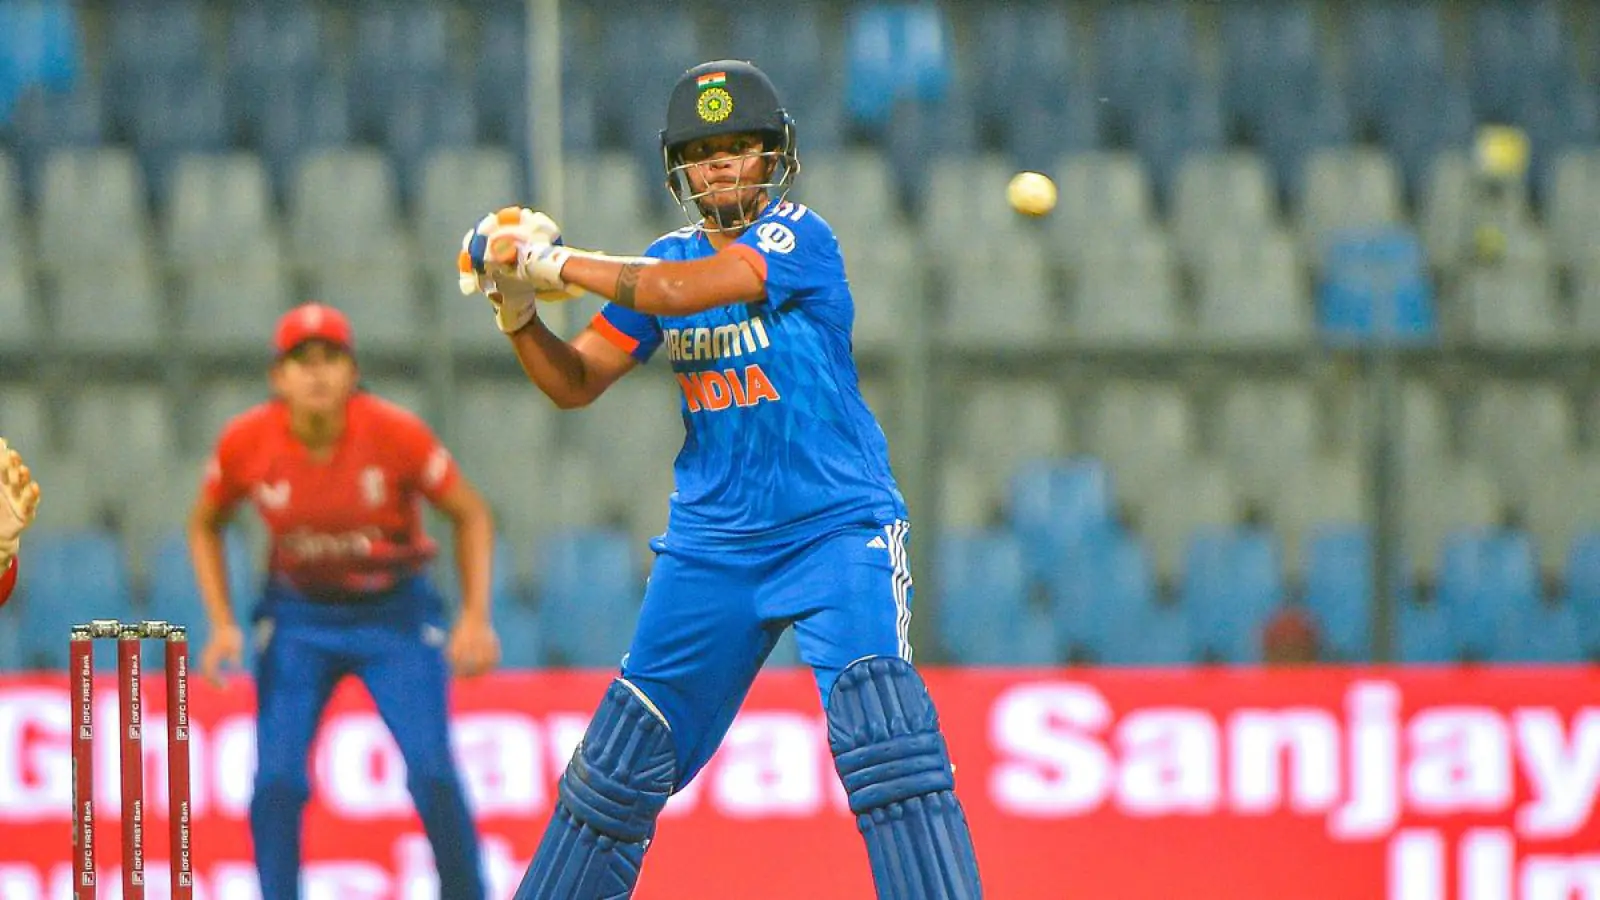 INDW vs ENGW: Watt-Brunt's half-centuries overshadowed Shefali's fifty, India lost the first T20